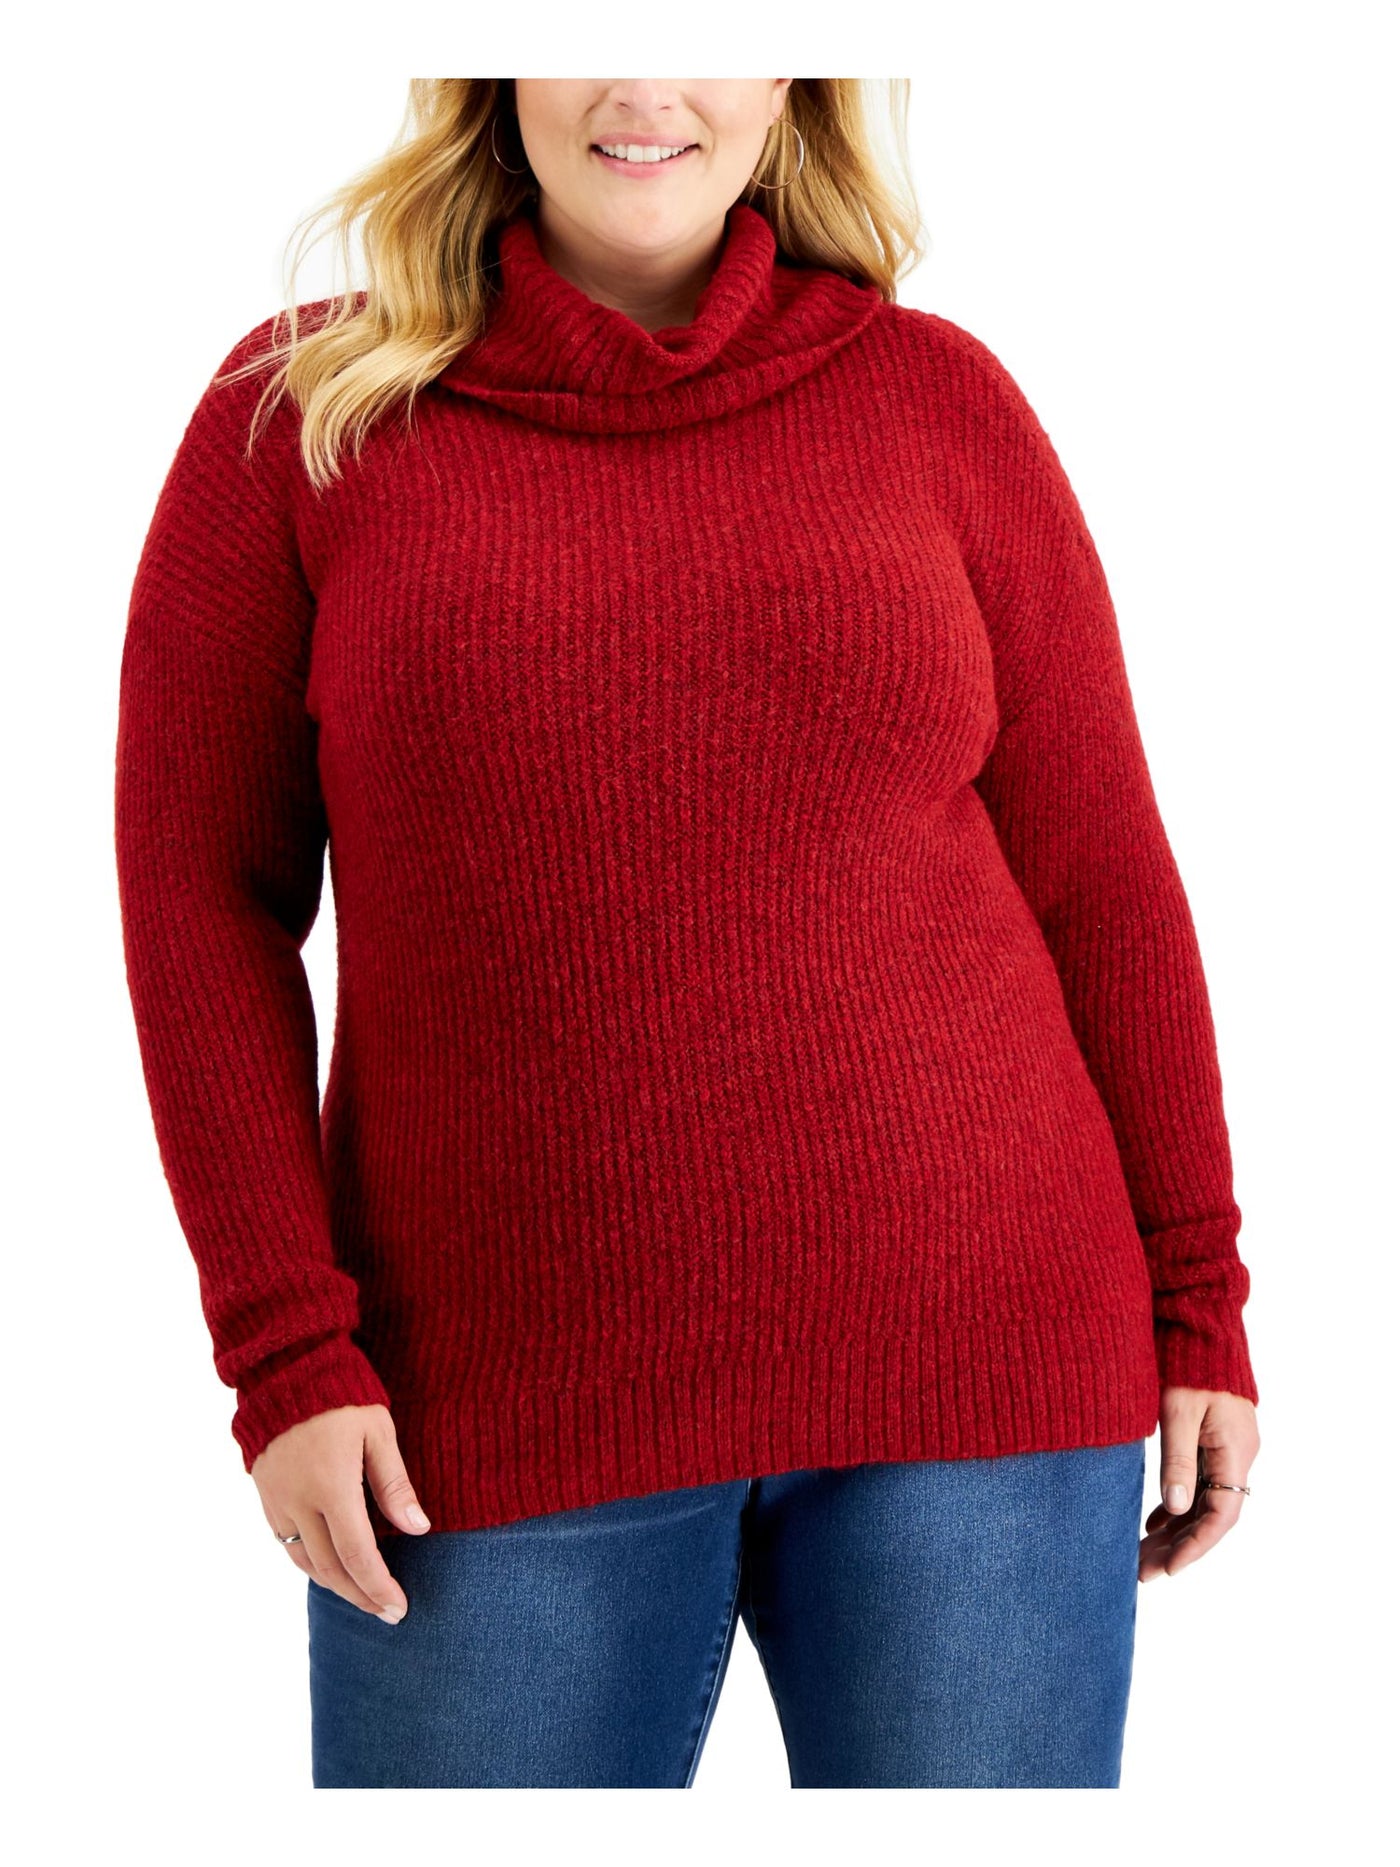 STYLE & COMPANY Womens Red Knit Ribbed Heather Long Sleeve Cowl Neck Tunic Sweater Plus 1X